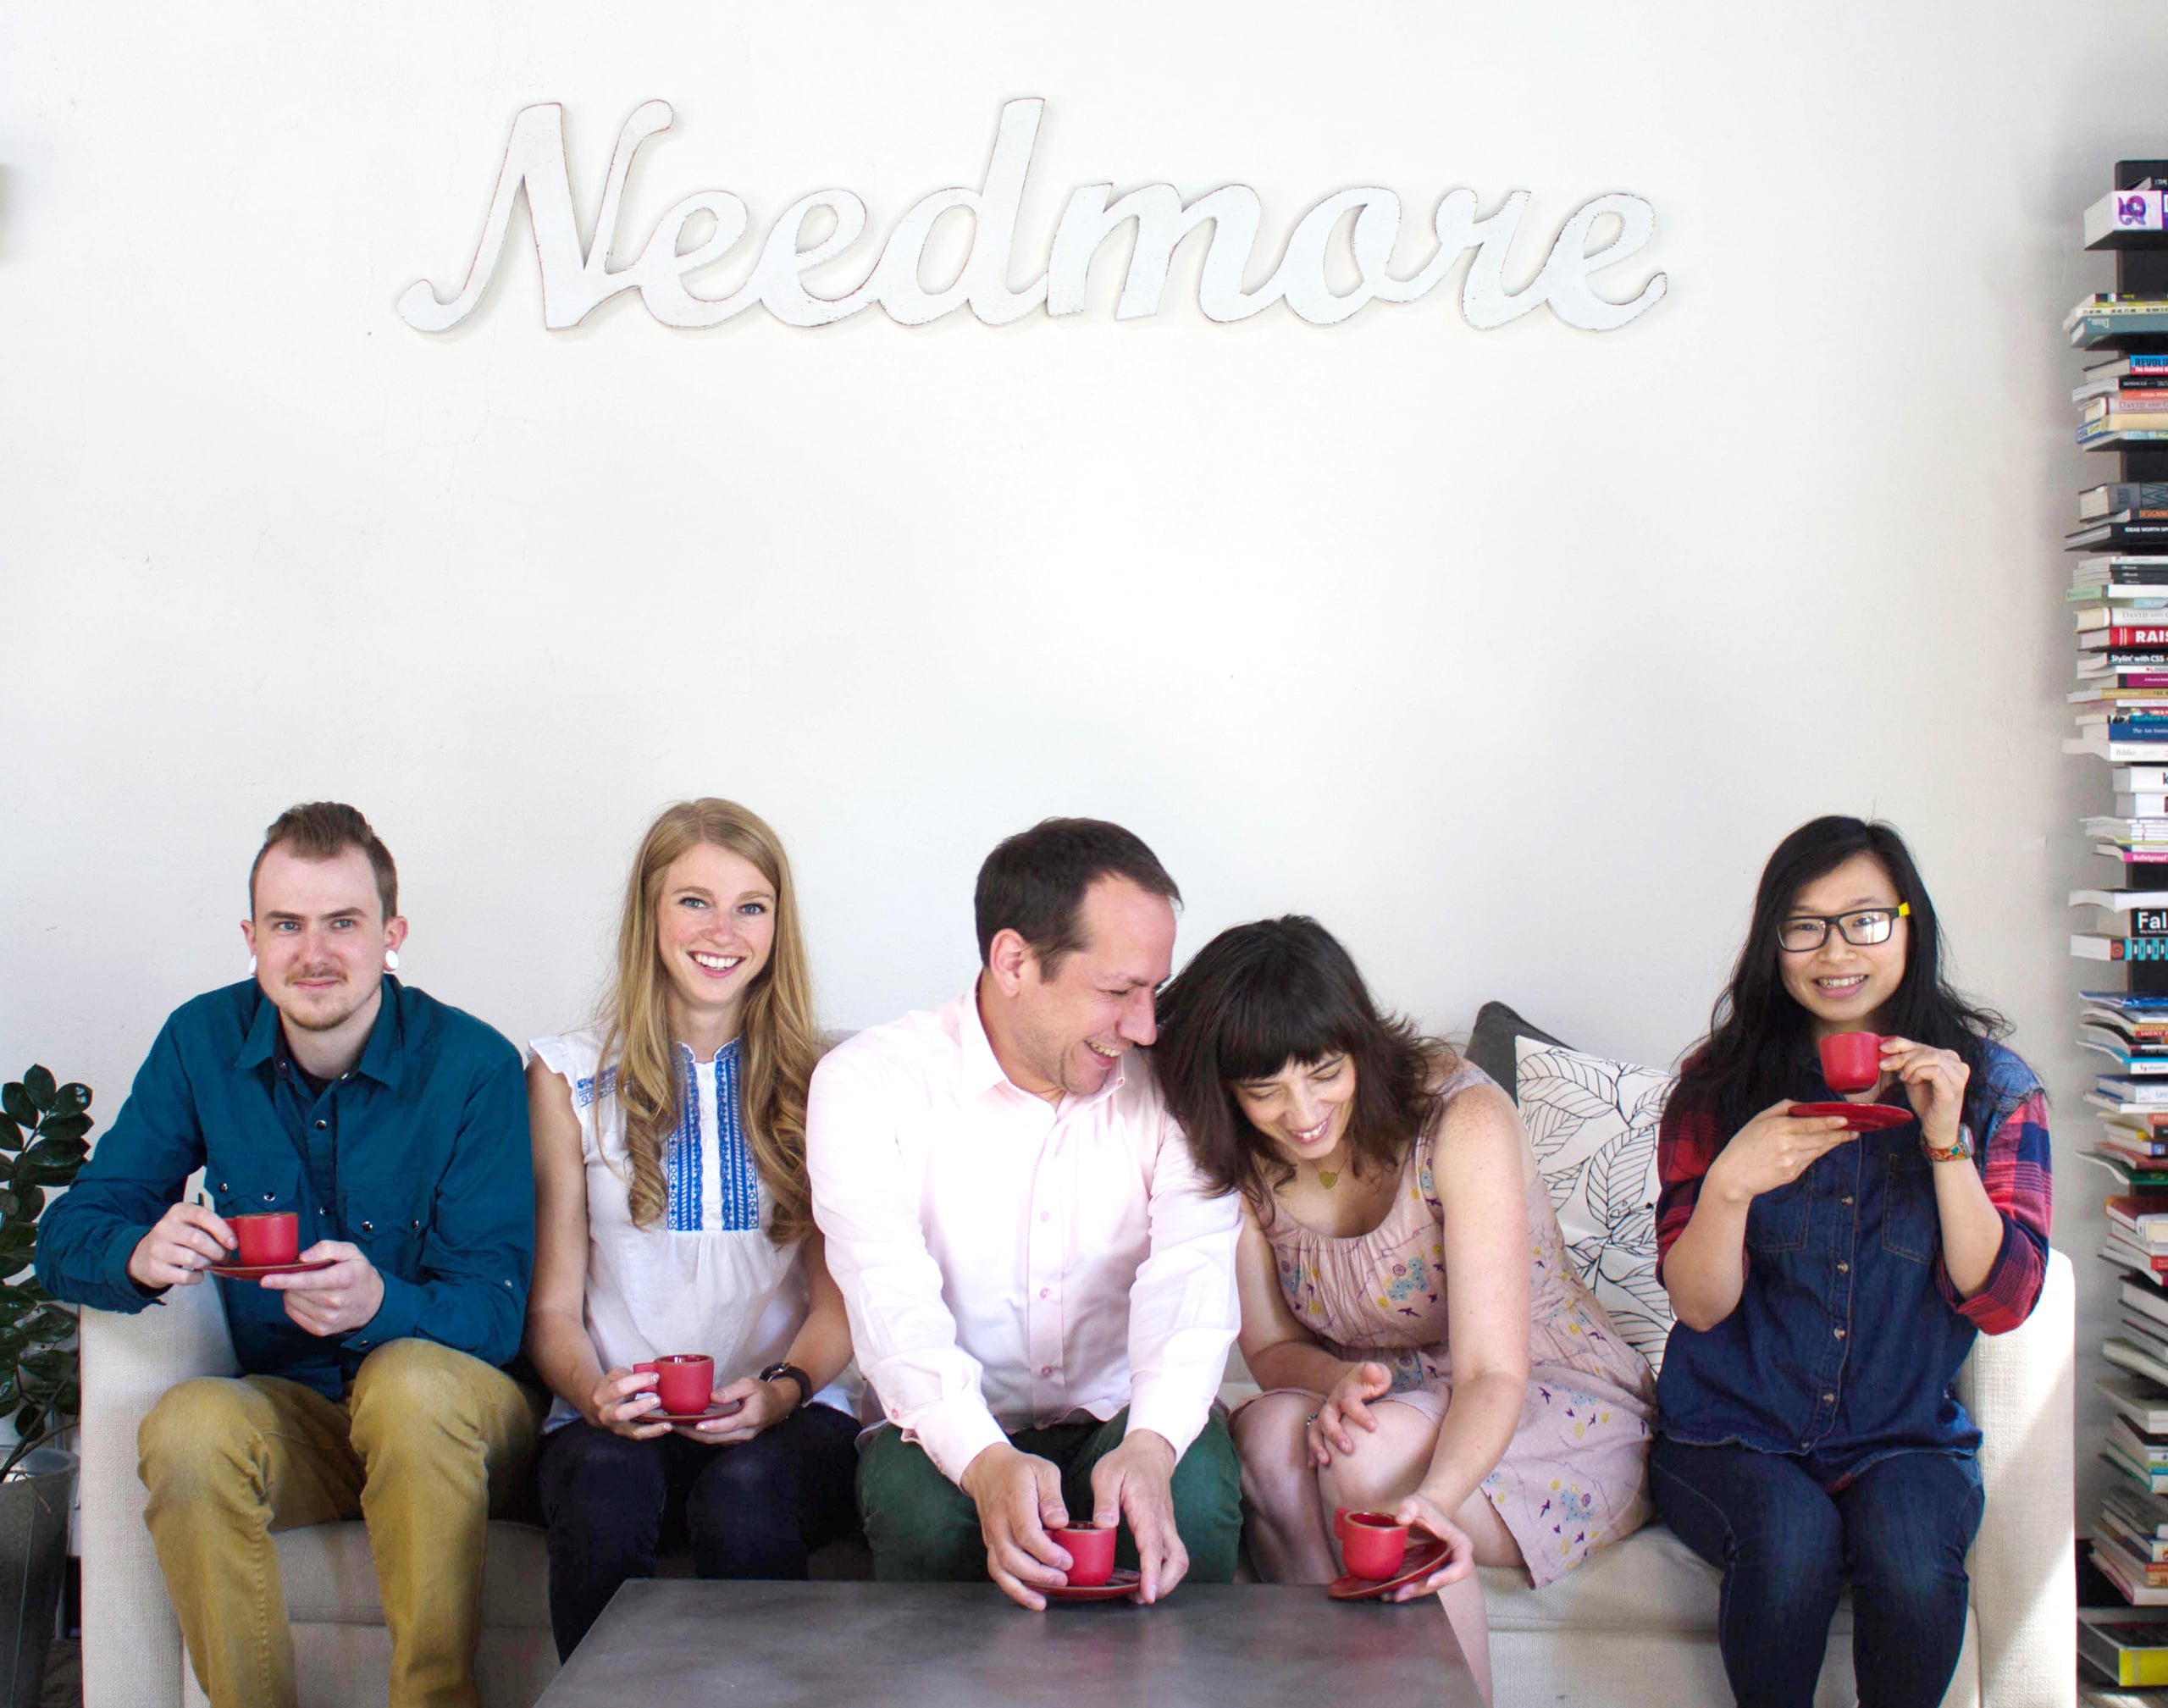 Team Needmore, on a couch!